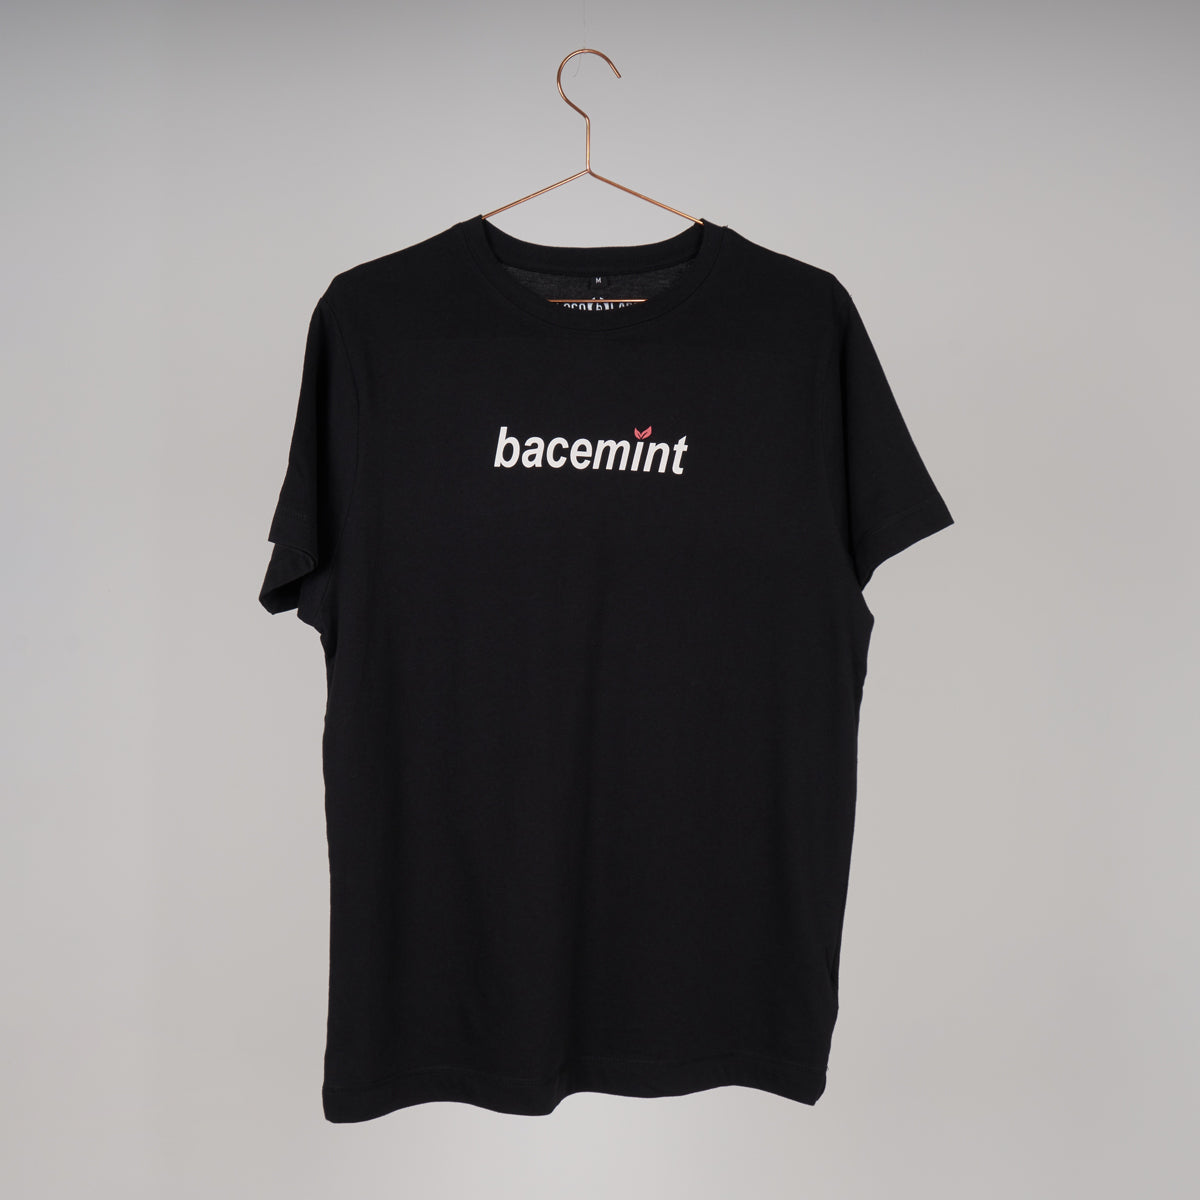 Loco Labs x Bacemint T-Shirt